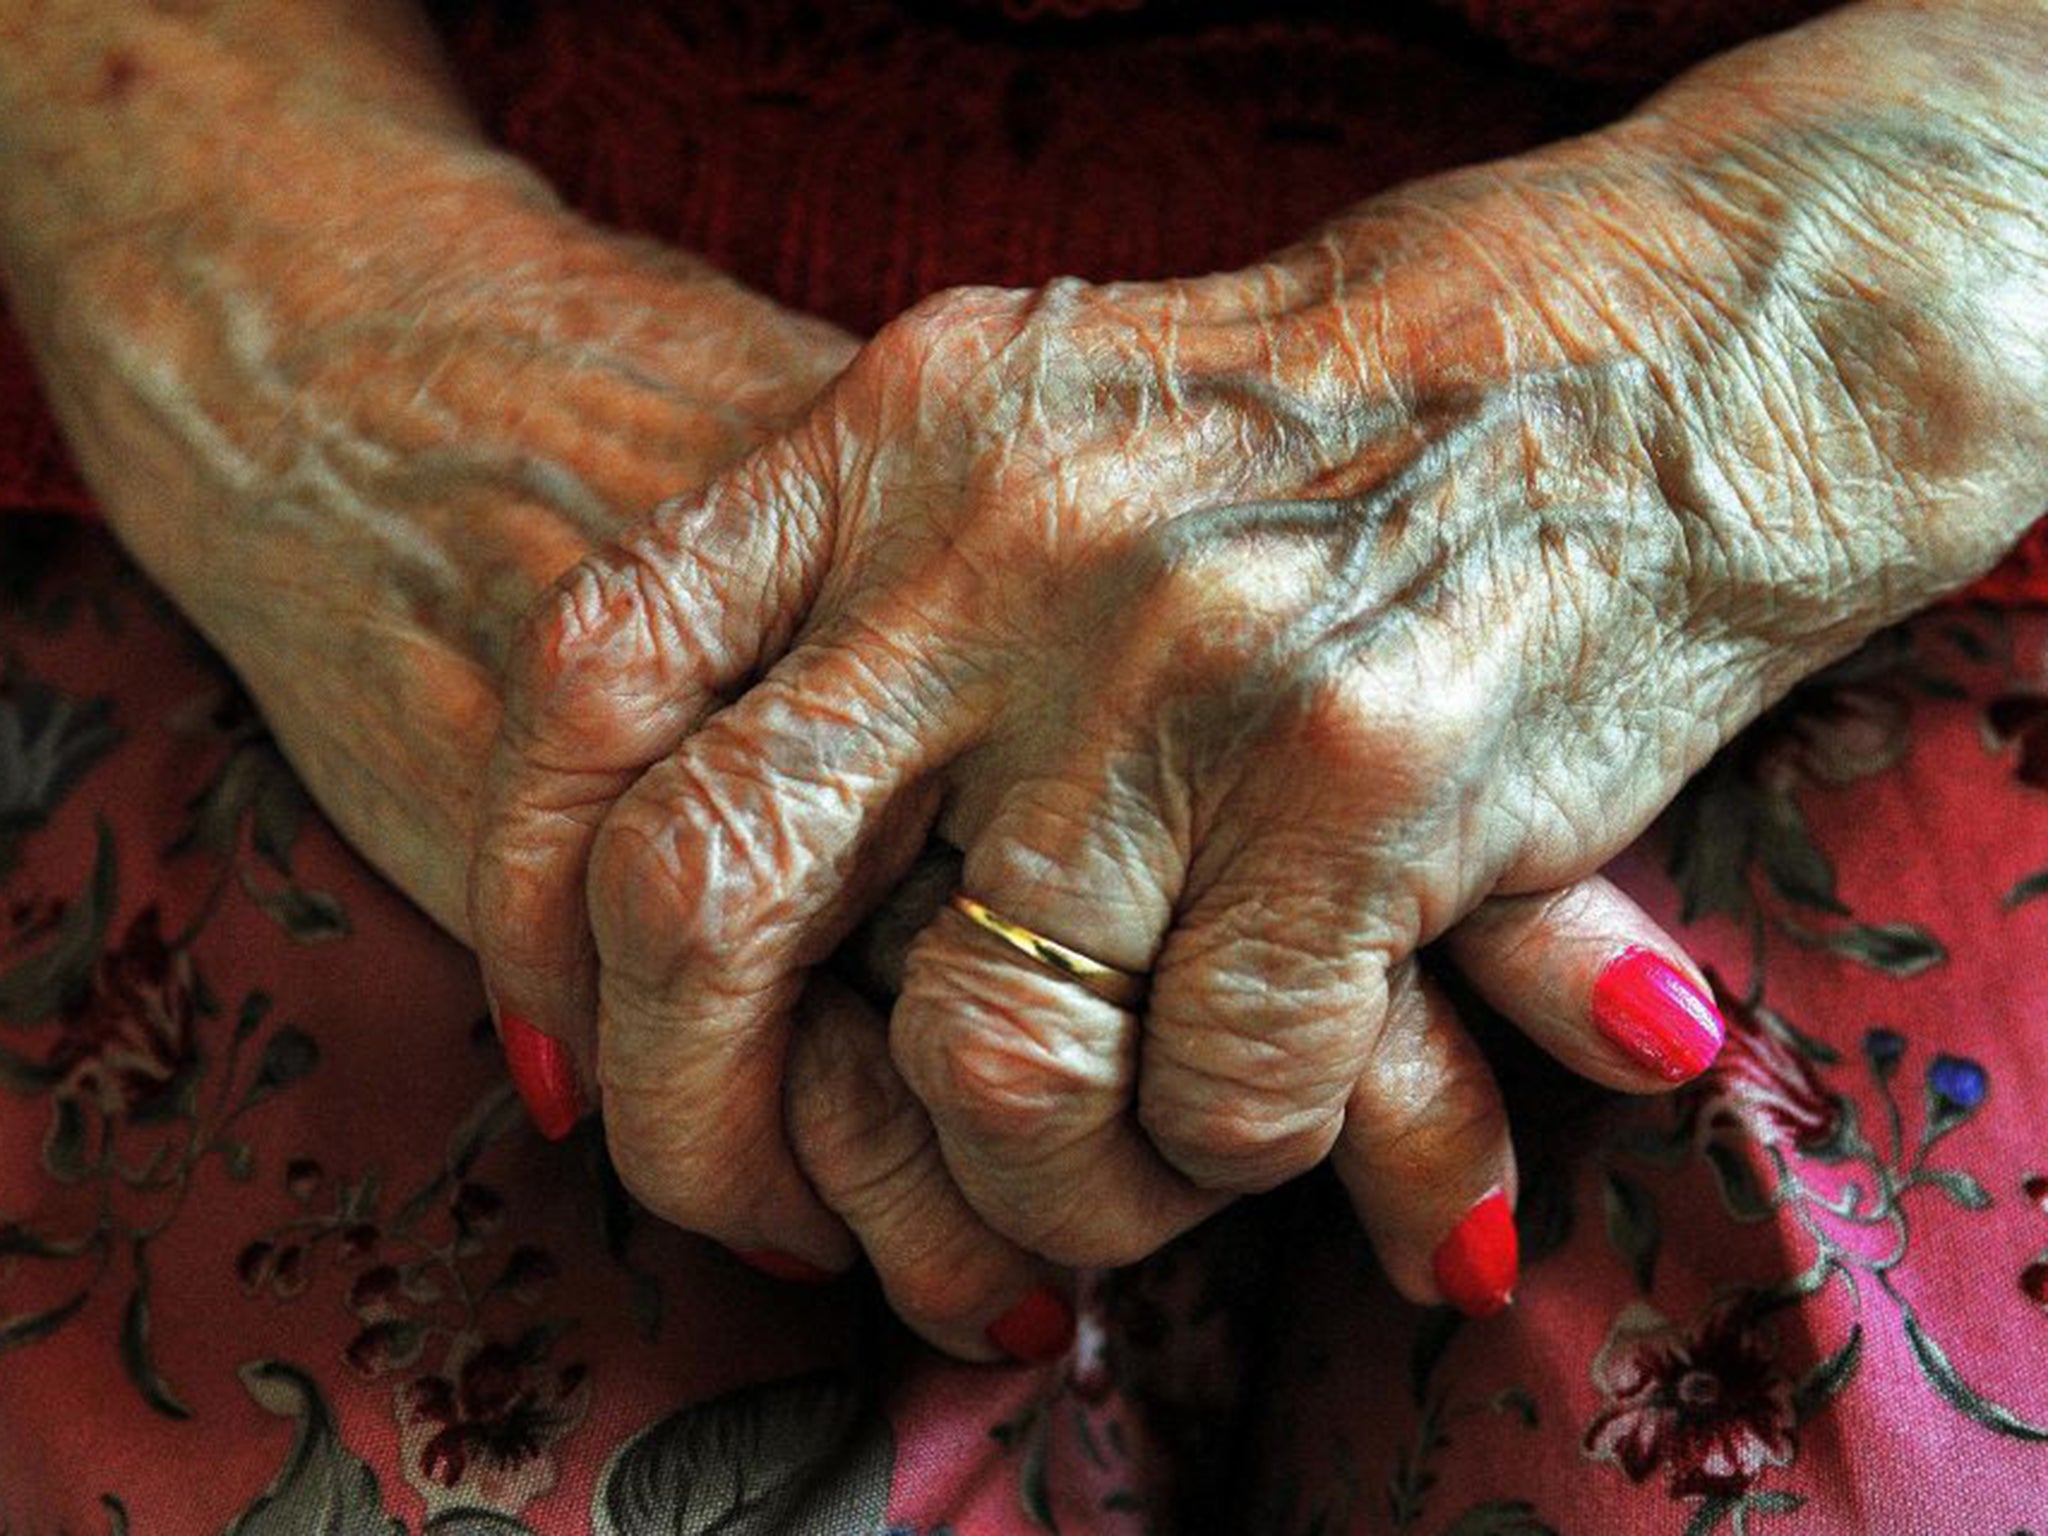 Elderly people are robbed of cash and assets worth more than £78m each year